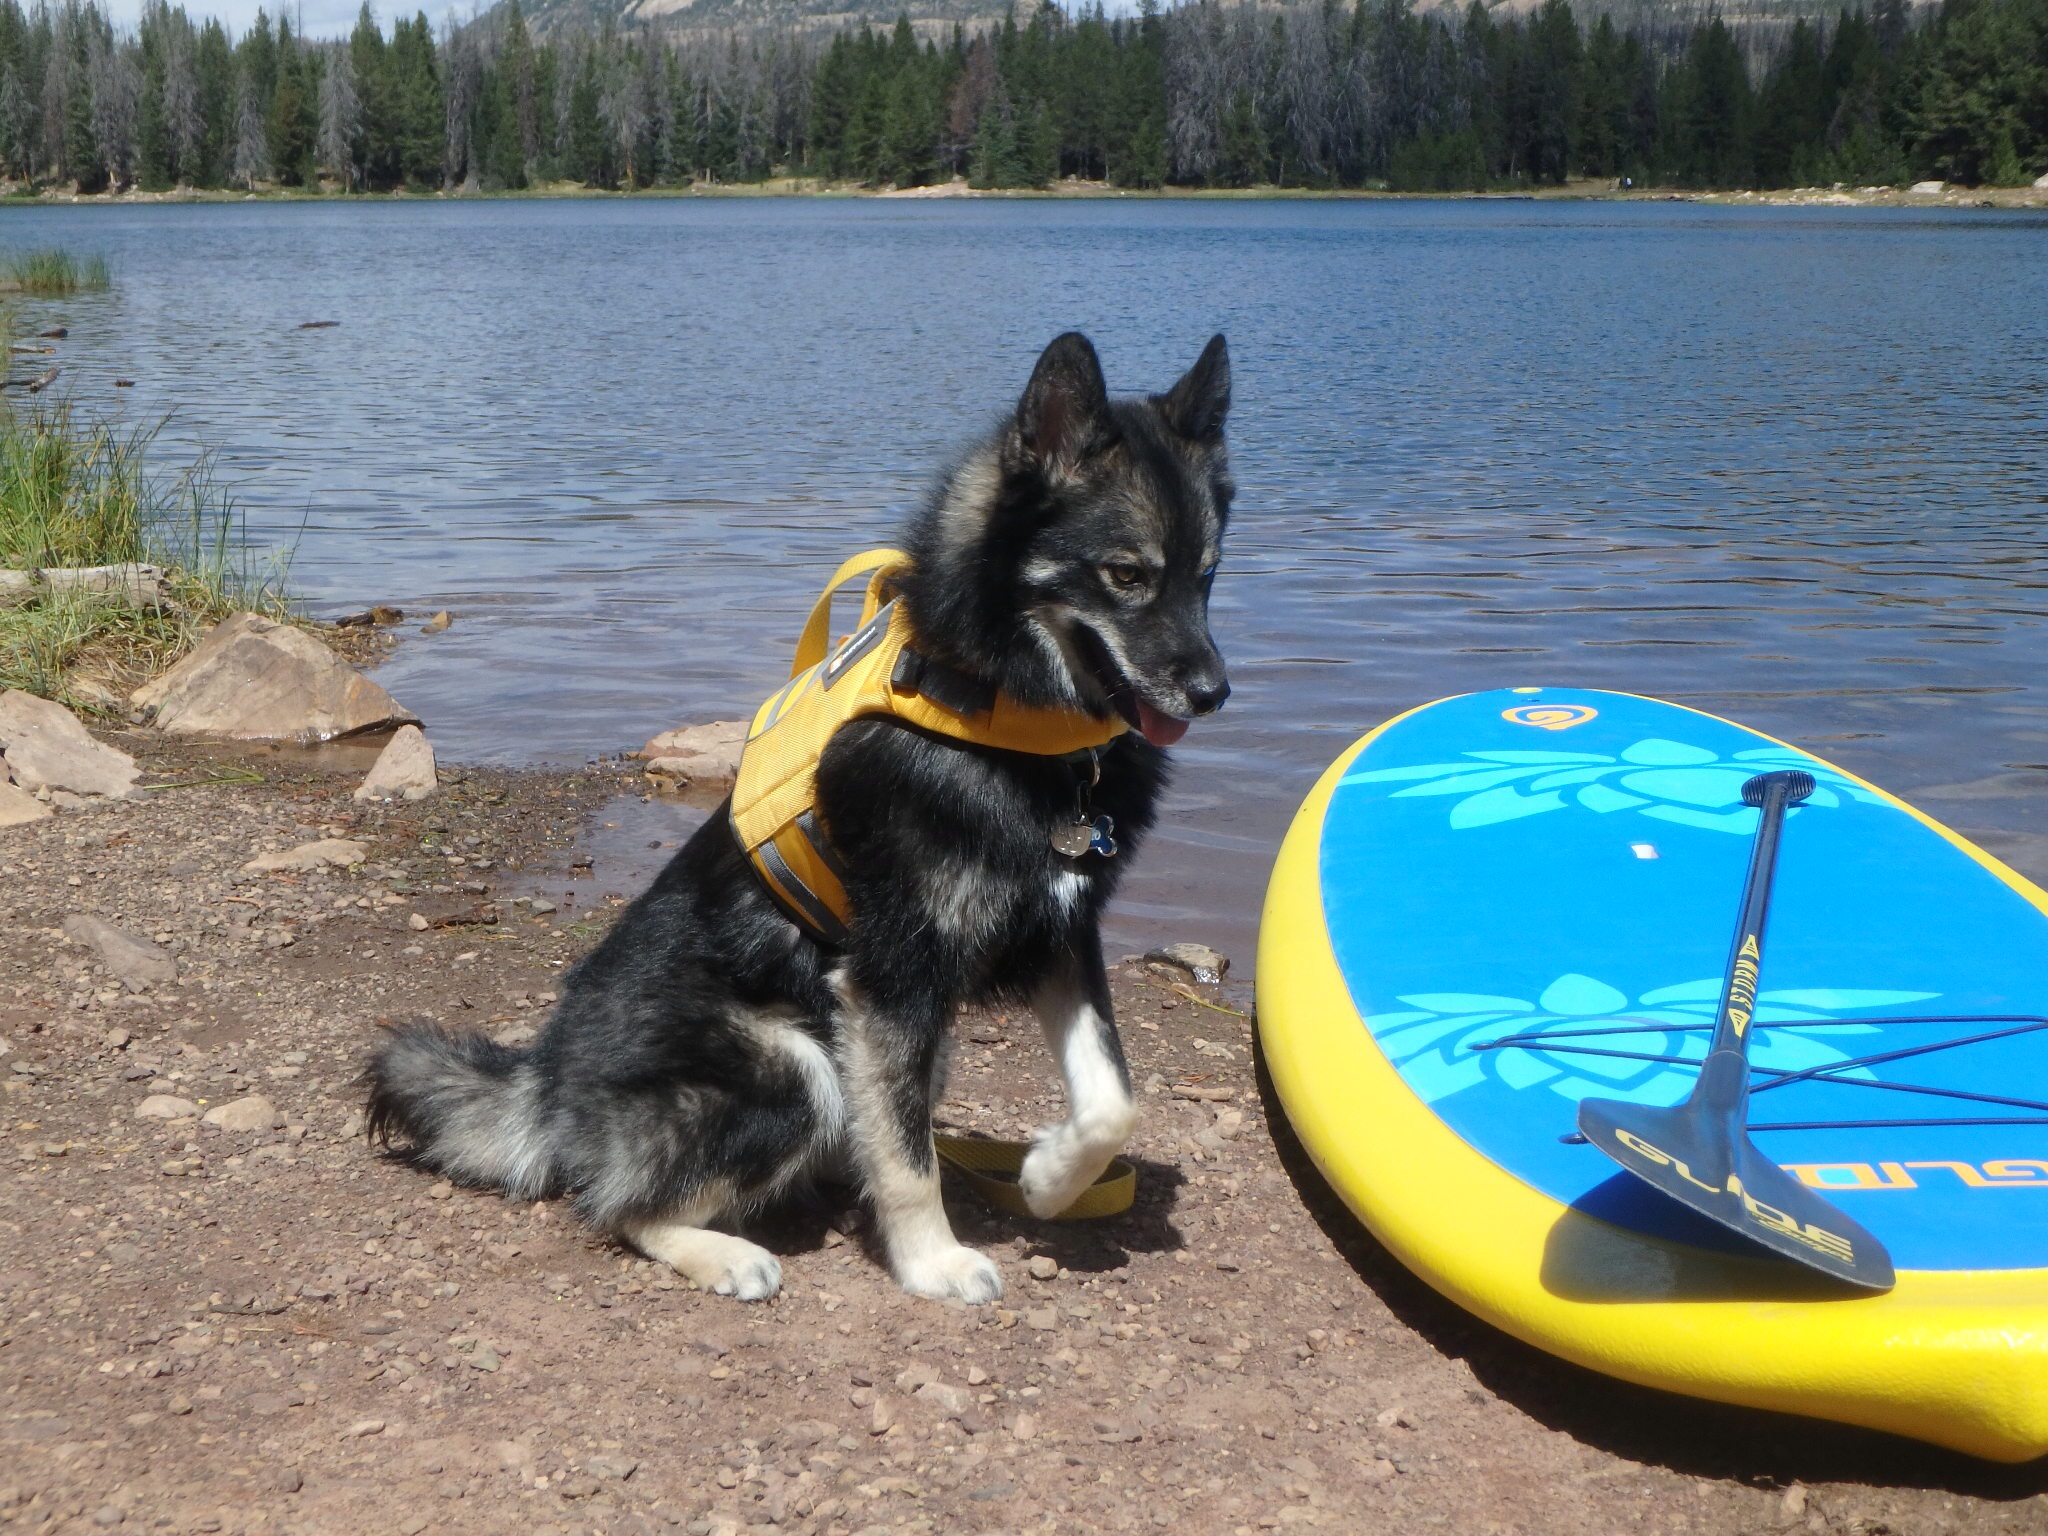 Ekko and his paddle board the Glide Lotus